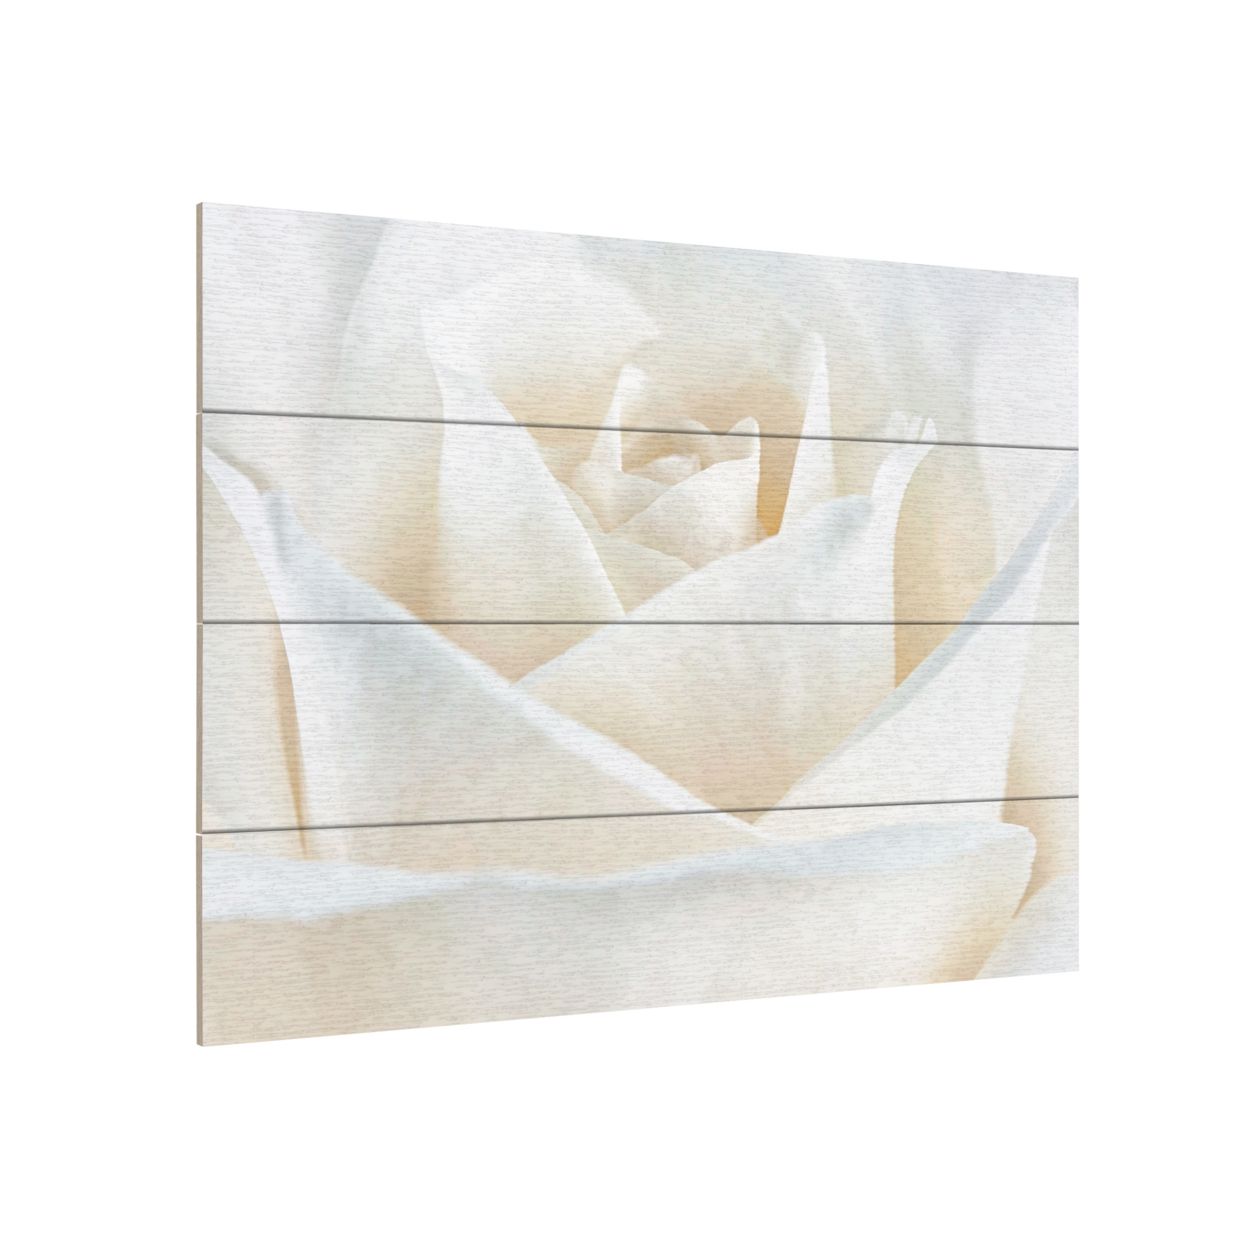 Wall Art 12 X 16 Inches Titled Pure White Rose Ready To Hang Printed On Wooden Planks